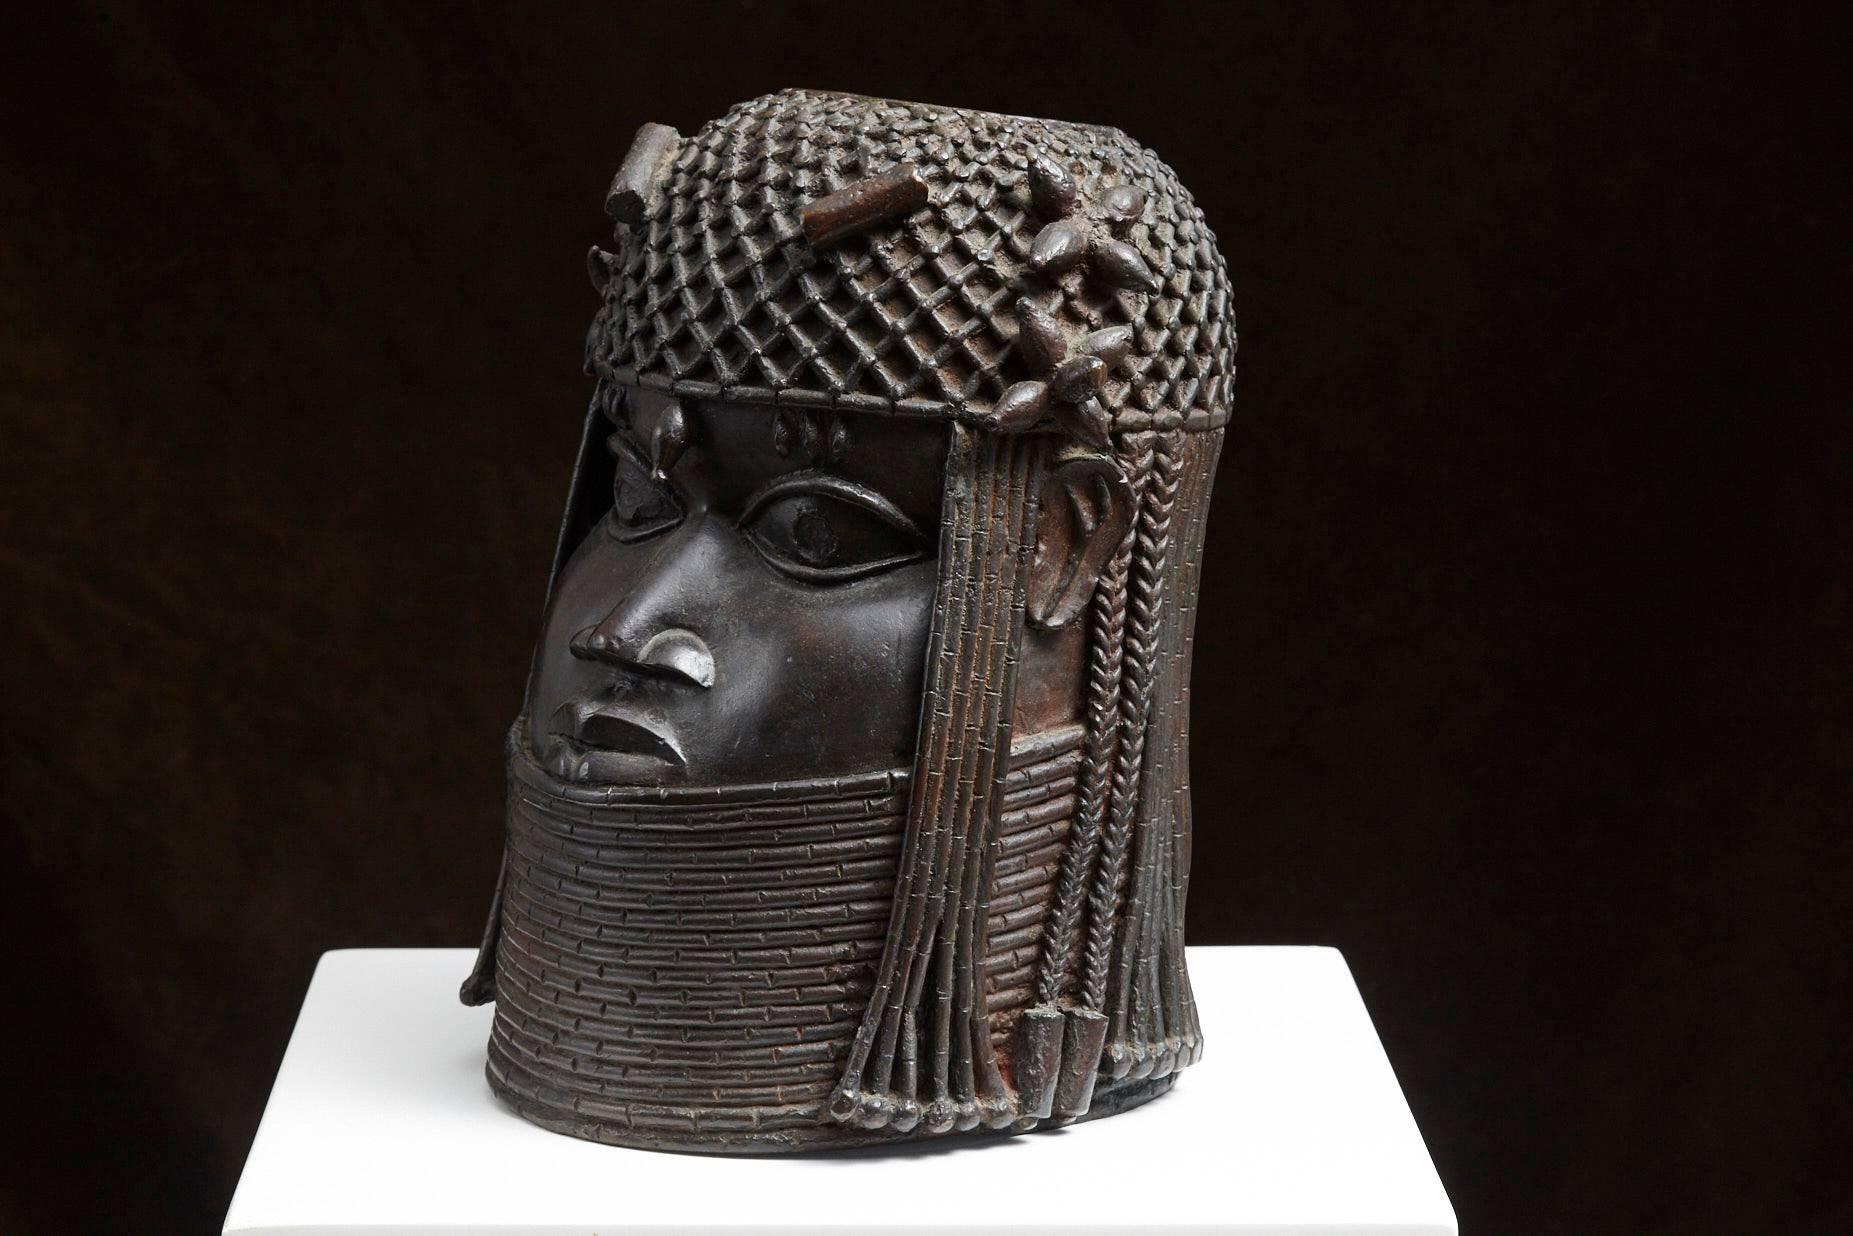 Benin Bronze Memorial Head from the Nelson Rockefeller Collection, 1978. The sculpture is stamped on the back.

'The Nelson Rockefeller Collection' was a line of about 100 high quality pieces of furniture and objects reproduced from the originals he